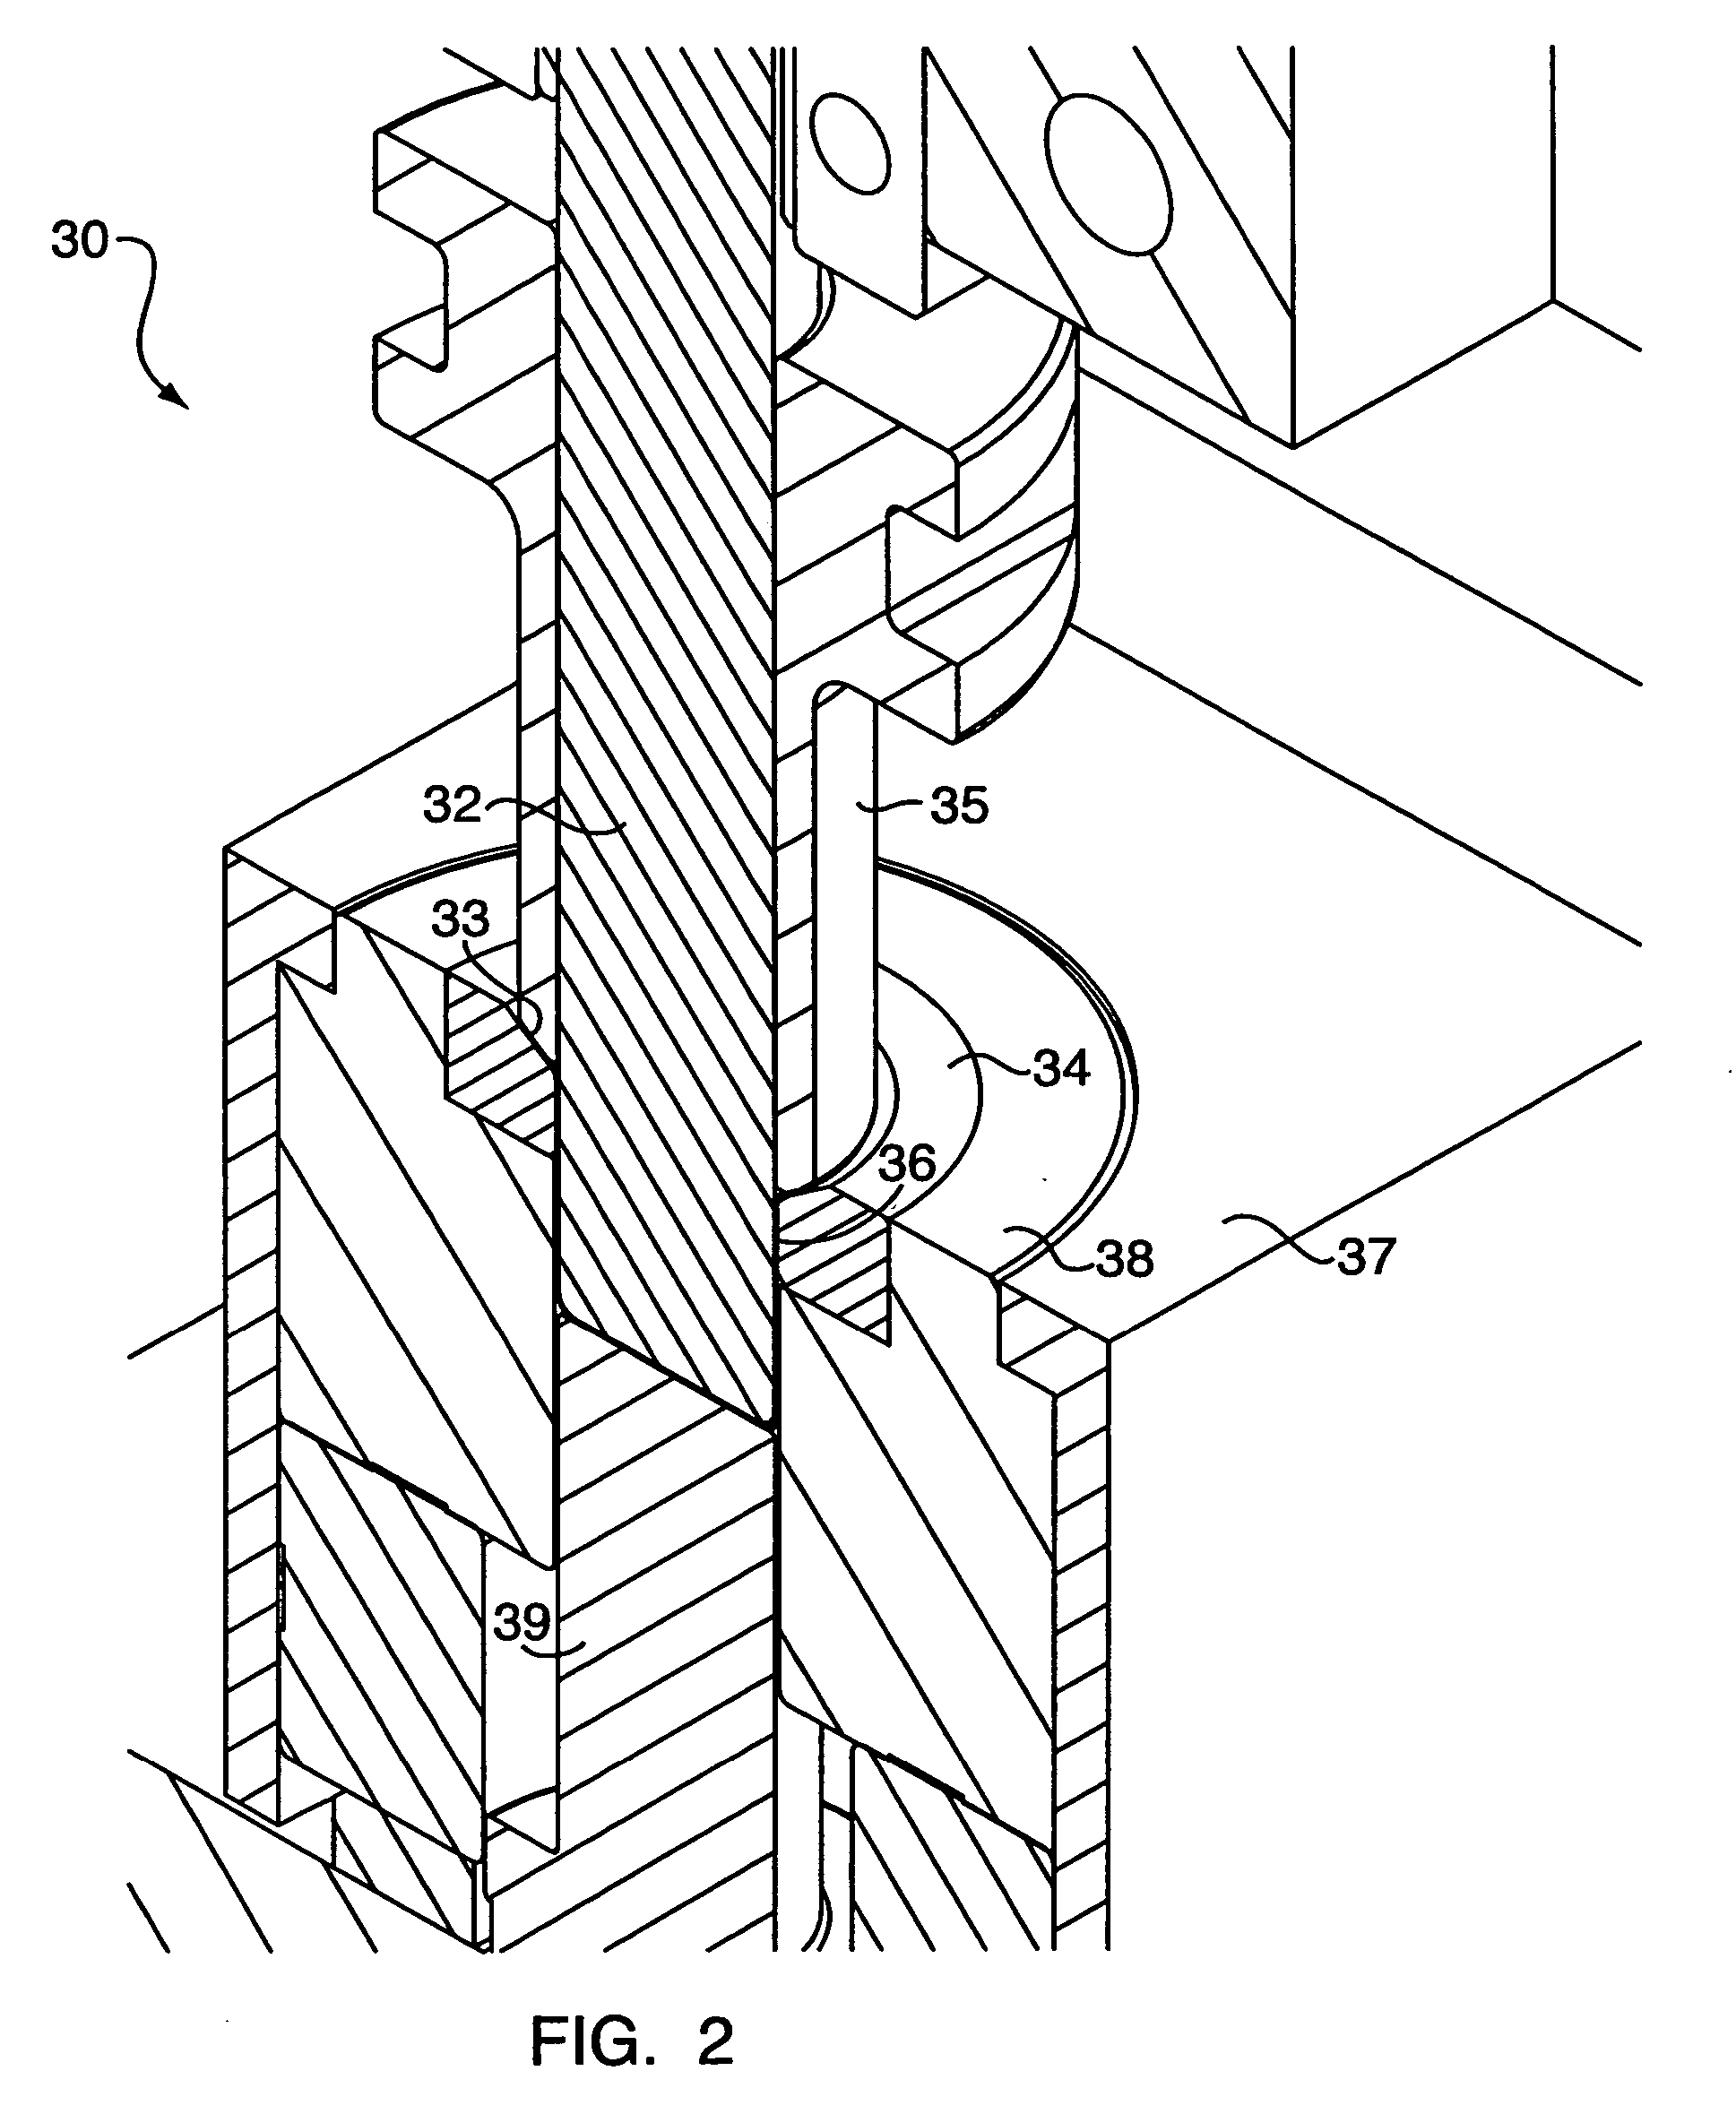 System and process for forming battery cans